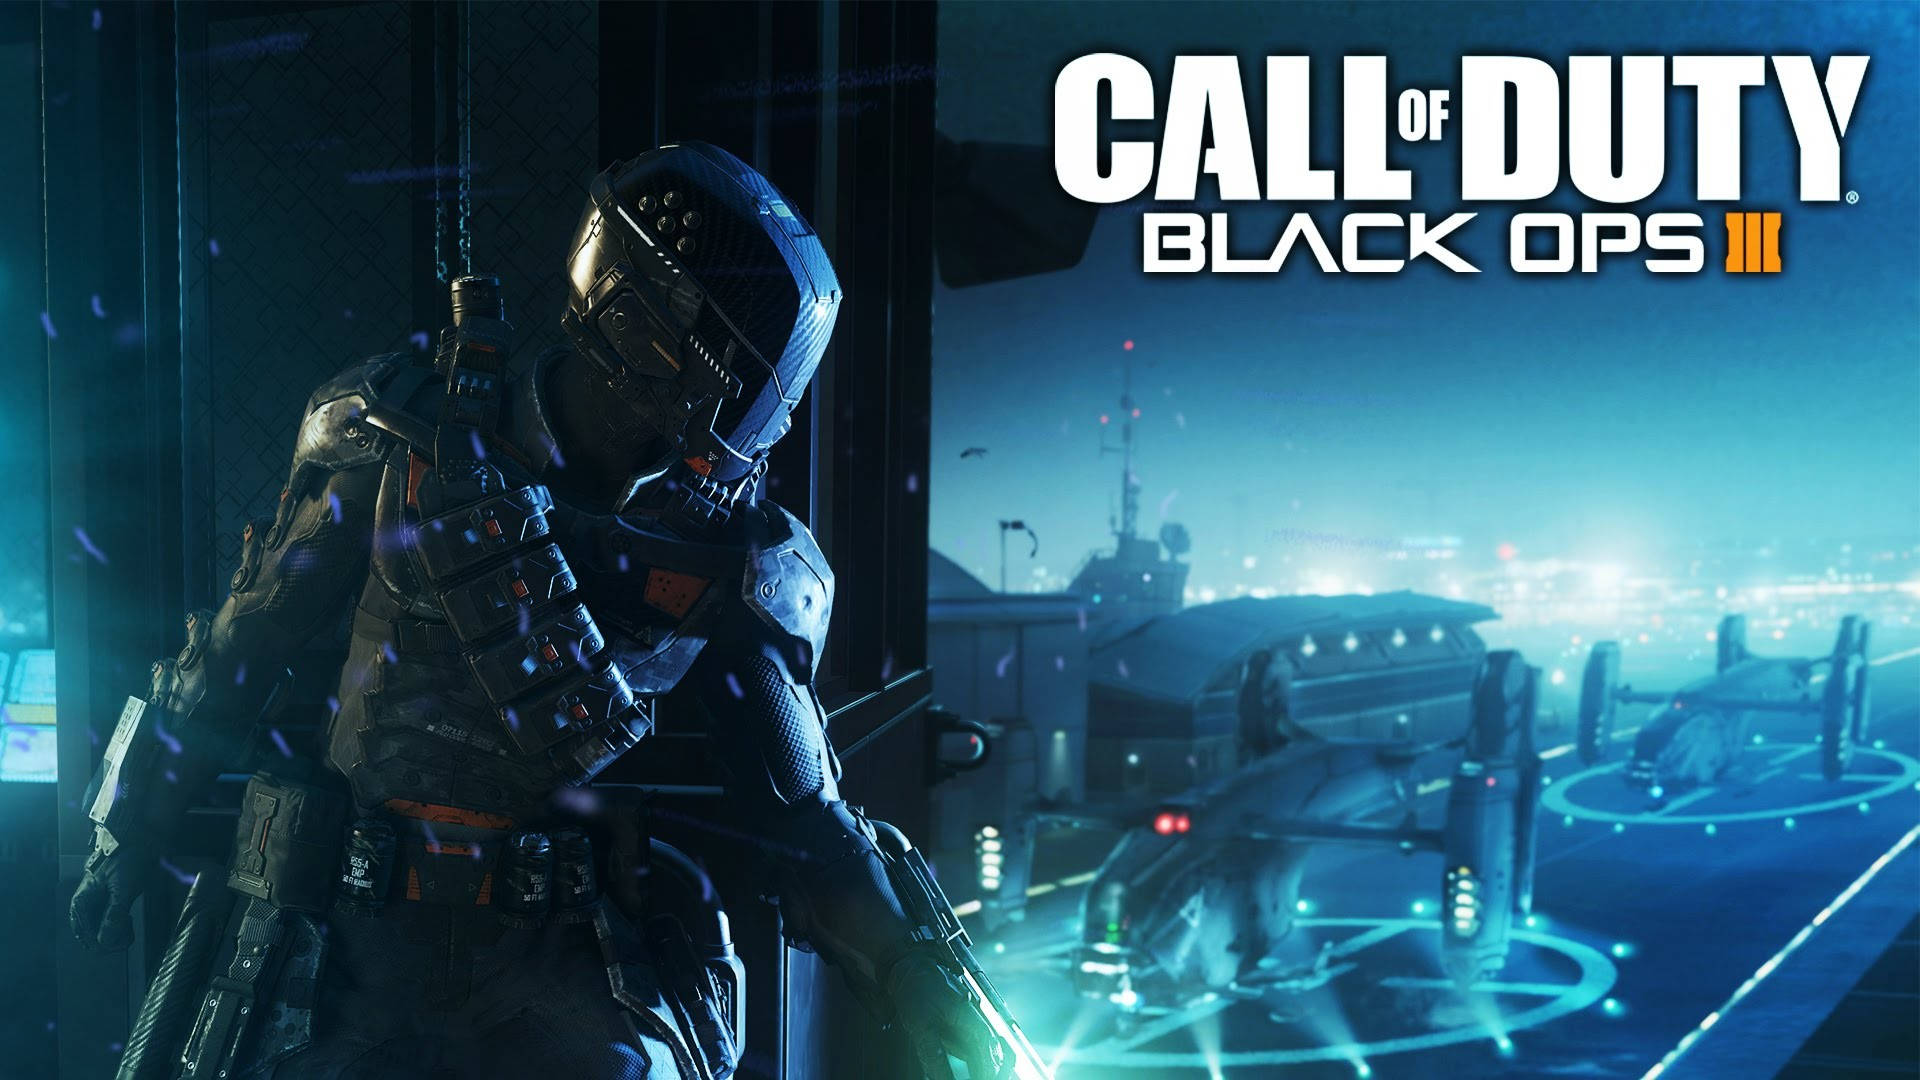 Don't miss out on the thrill and action of Call of Duty: Black Ops 3! Wallpaper